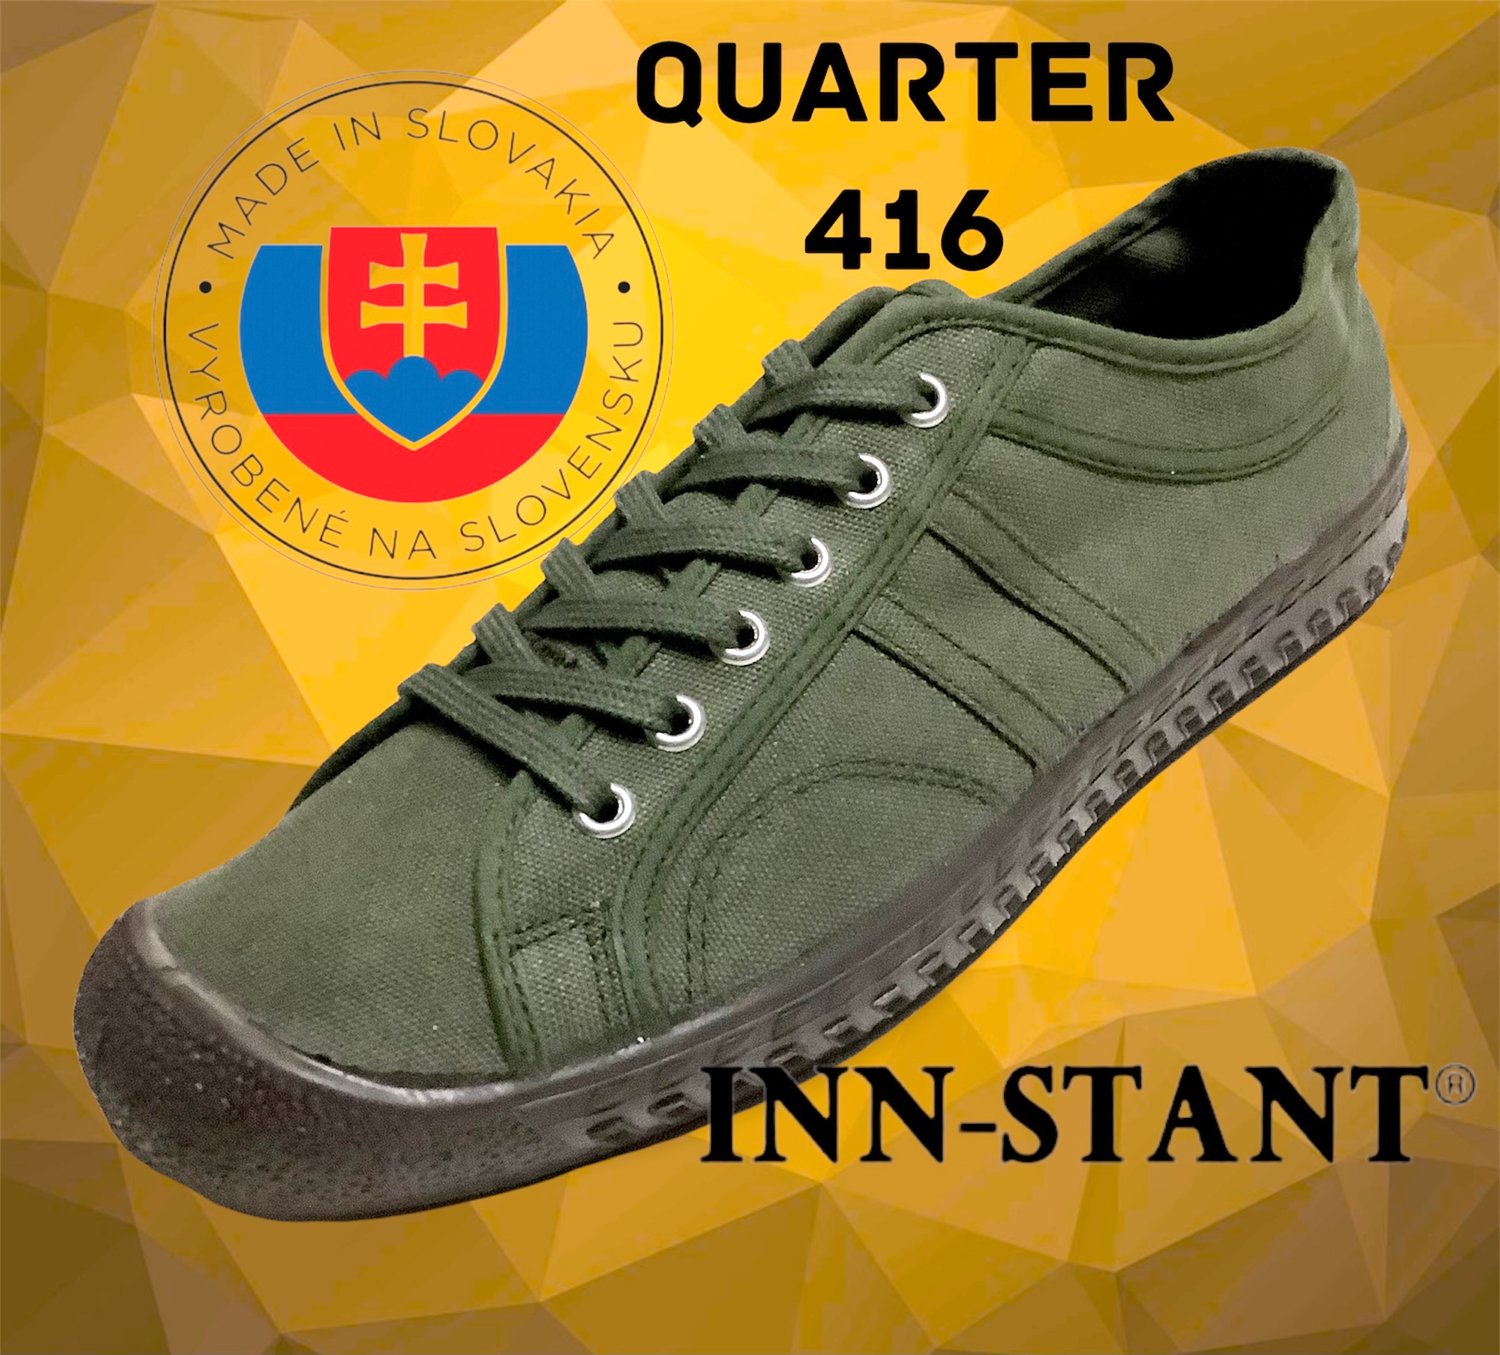 Image of Inn-stant canvas olive lo top sneaker shoes made in Slovakia 